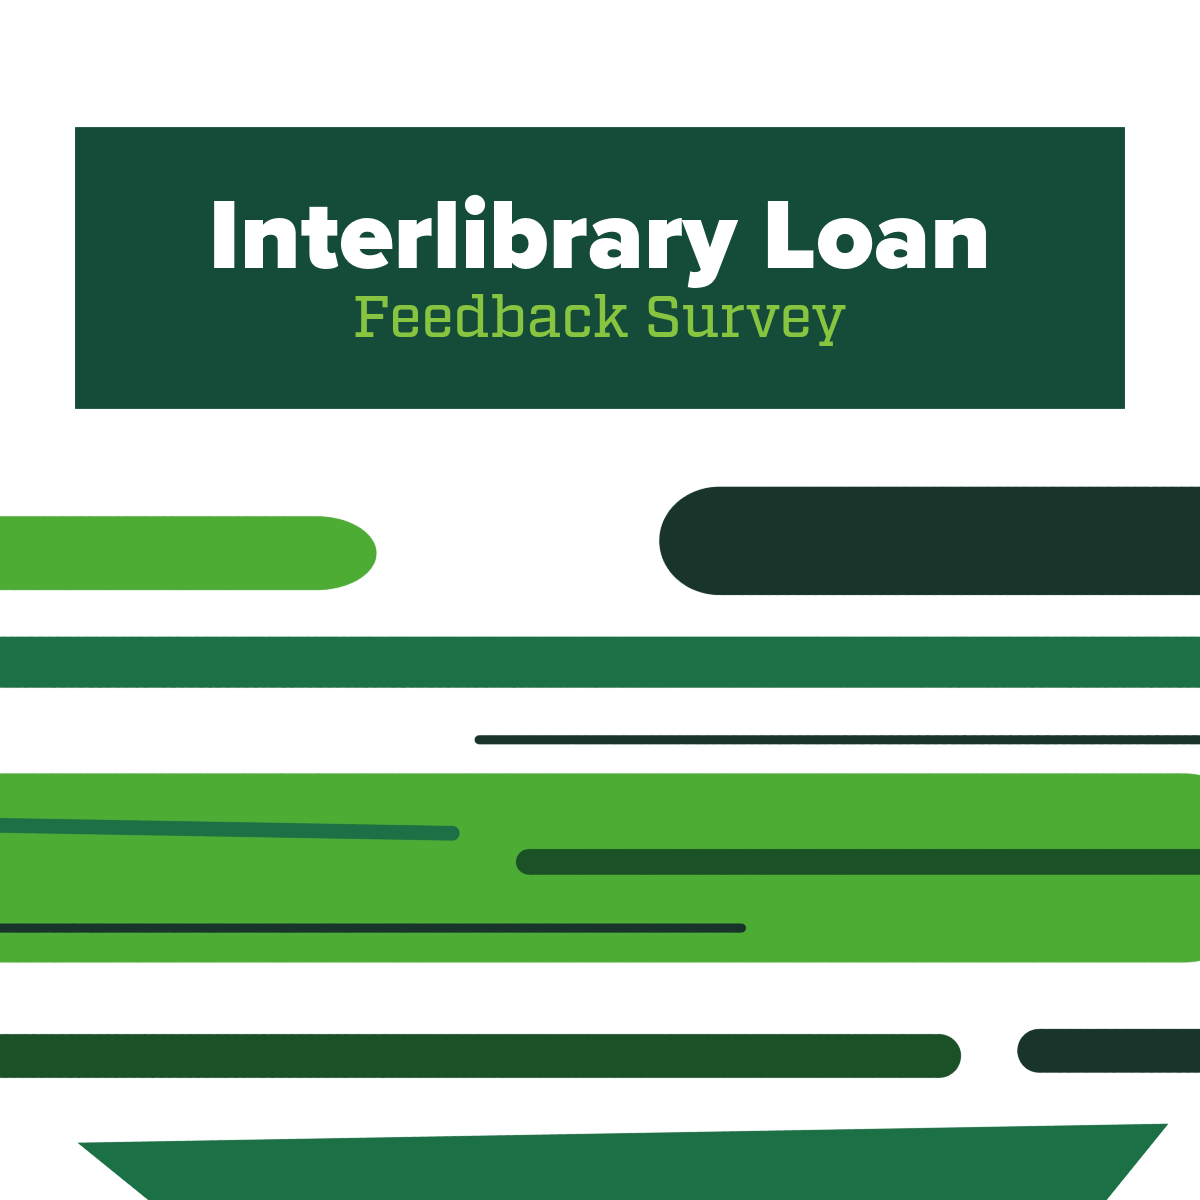 Share your feedback on Interlibrary Loan services by Sept. 15